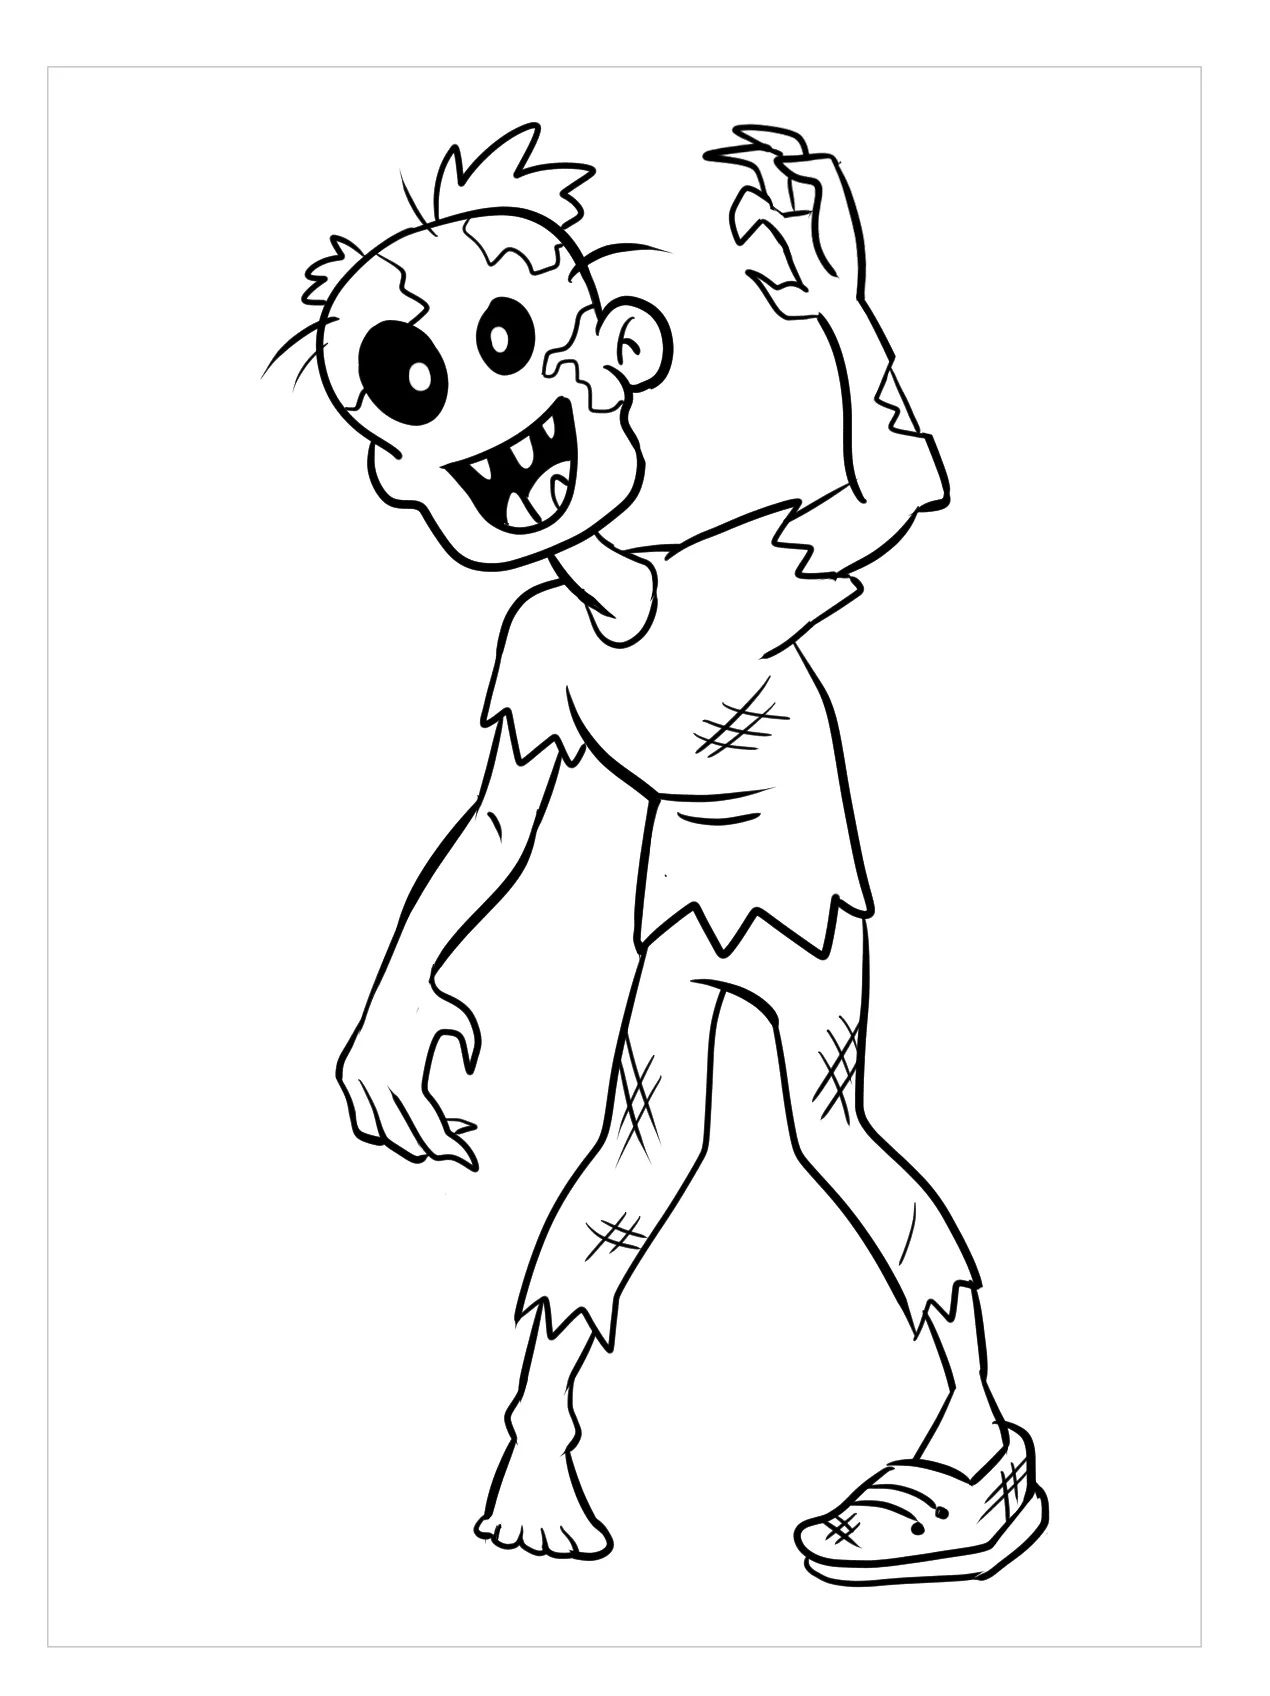 Halloween Coloring Pages Zombie & book for kids.